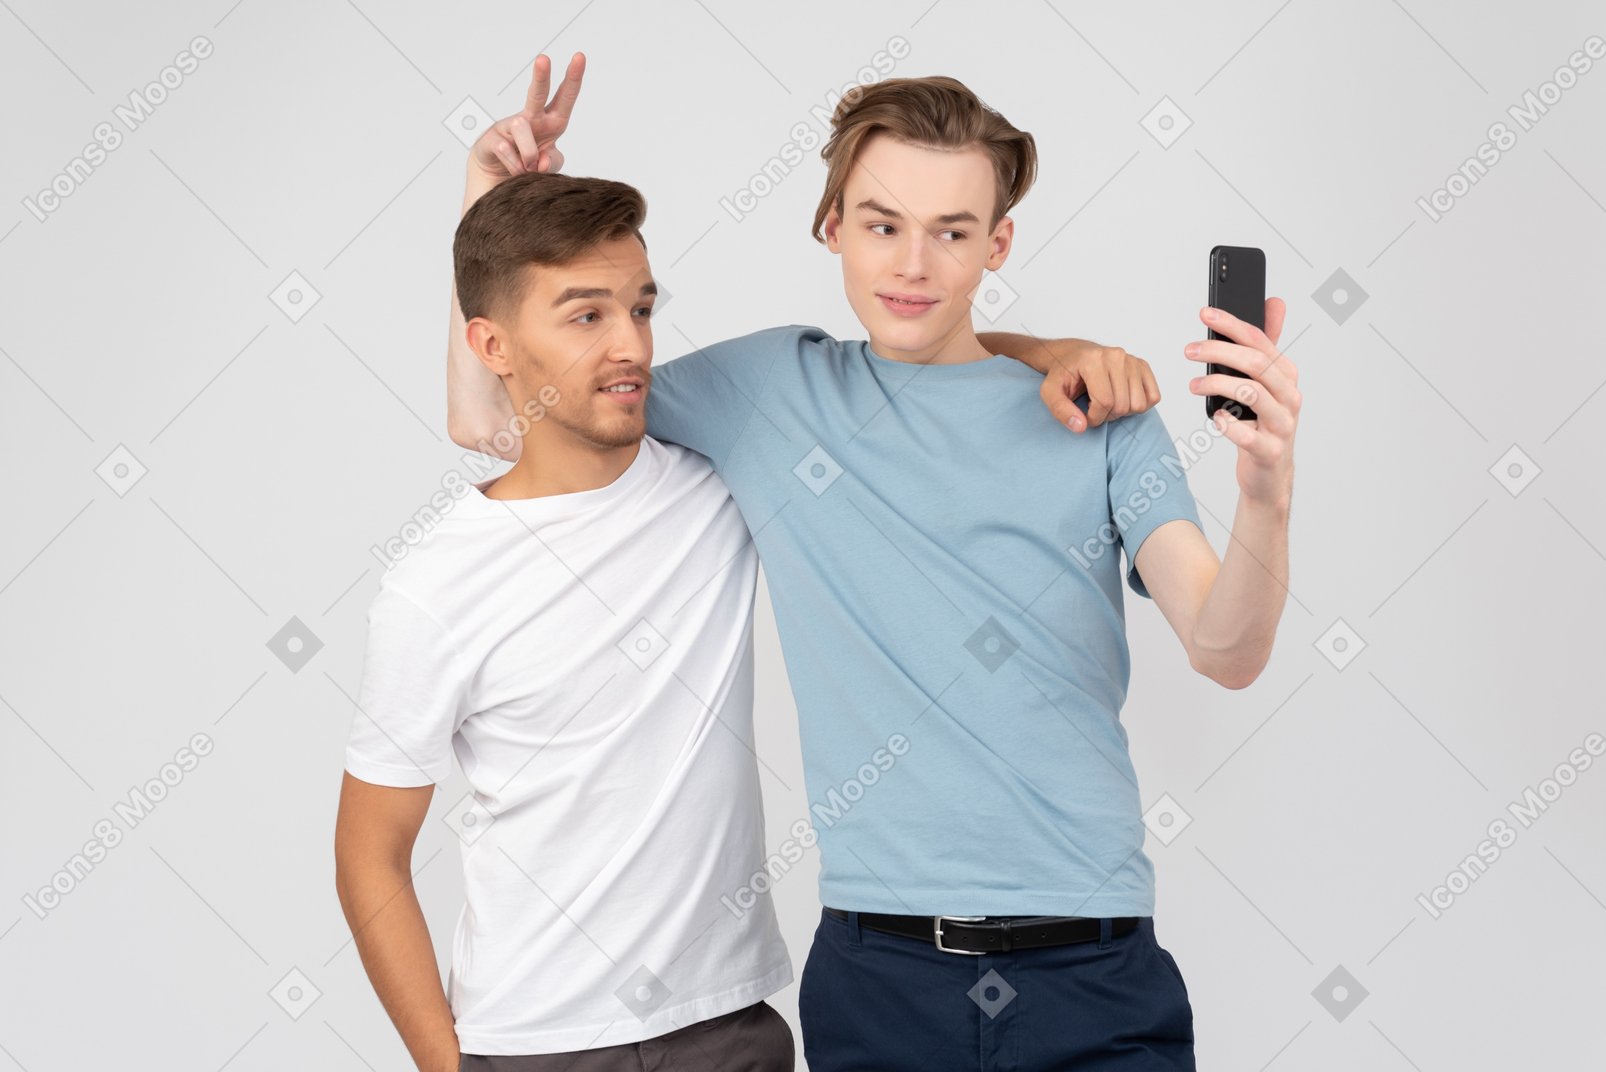 A quick selfie together with my bro